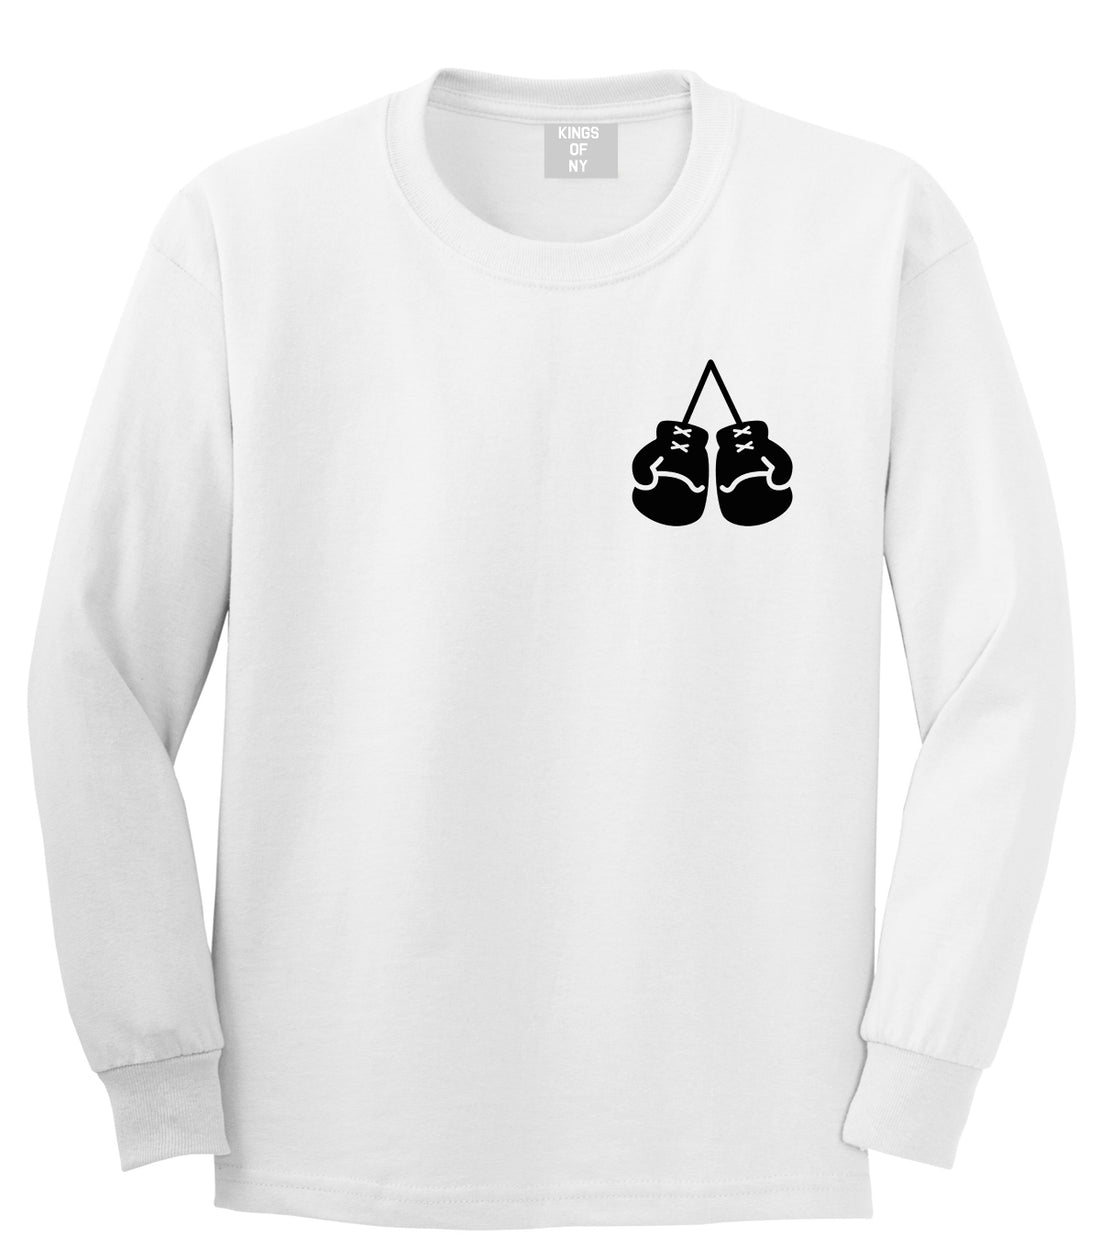 Boxing Gloves Chest White Long Sleeve T-Shirt by Kings Of NY